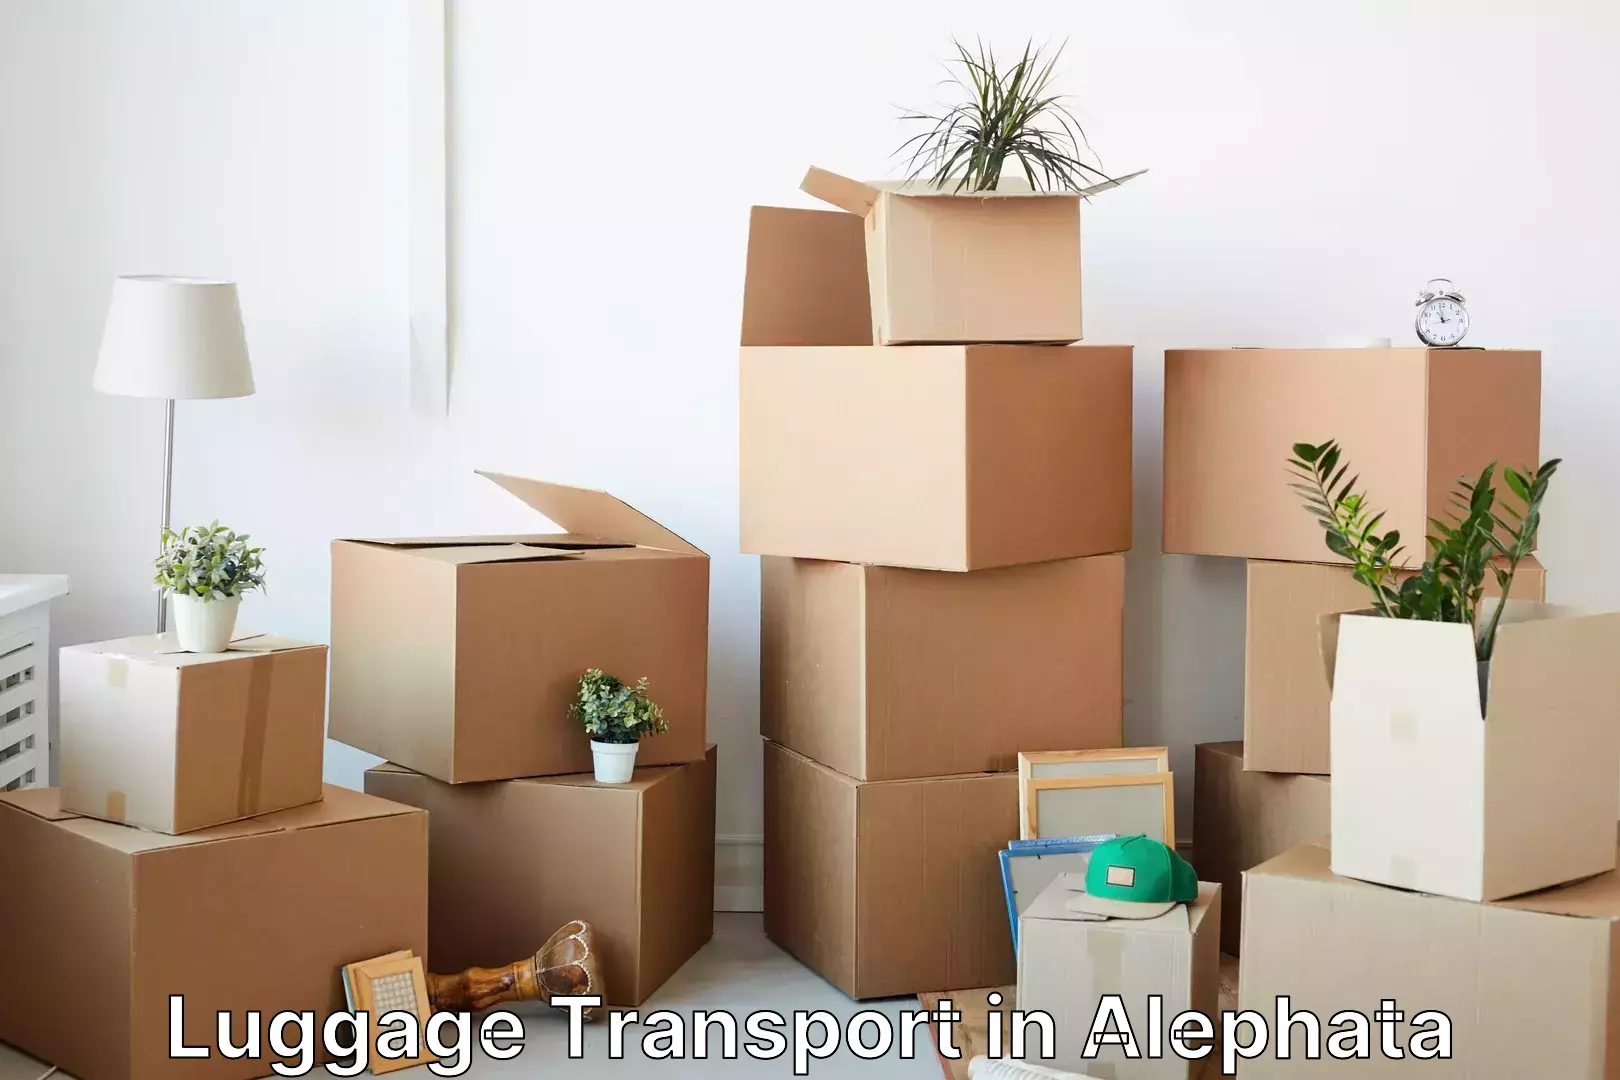 Luggage transport deals in Alephata